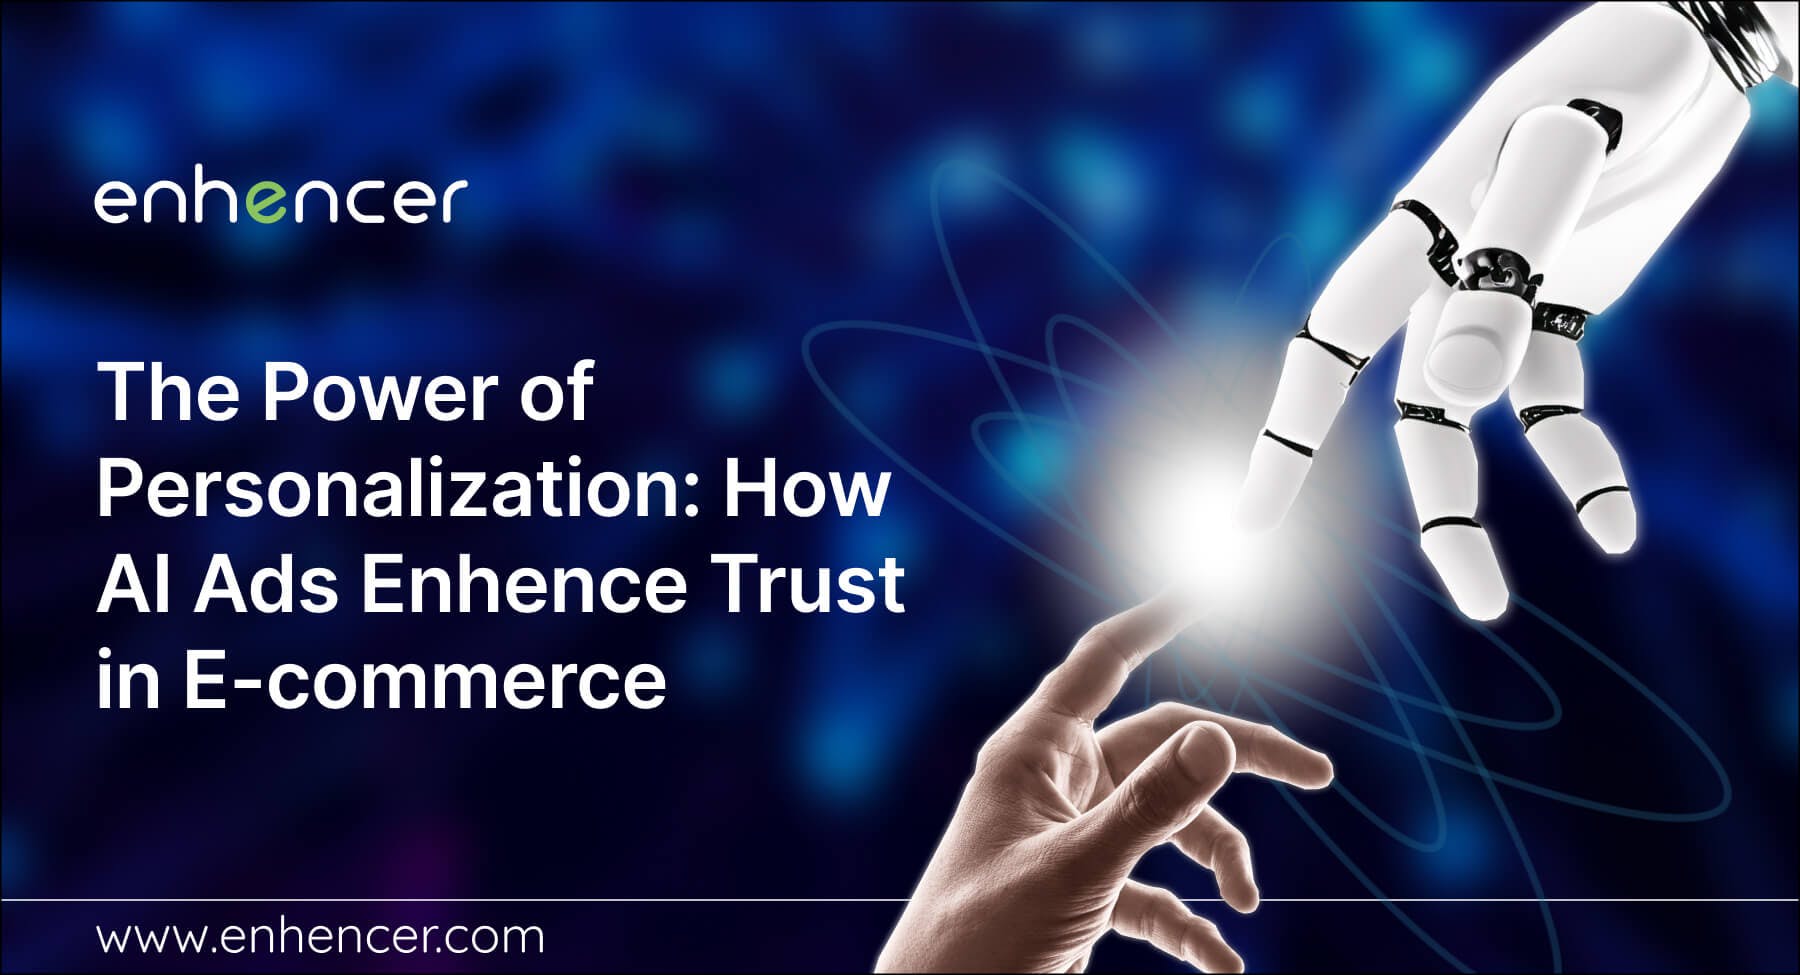 The Power of Personalization: How AI Ads Enhance Trust in E-commerce